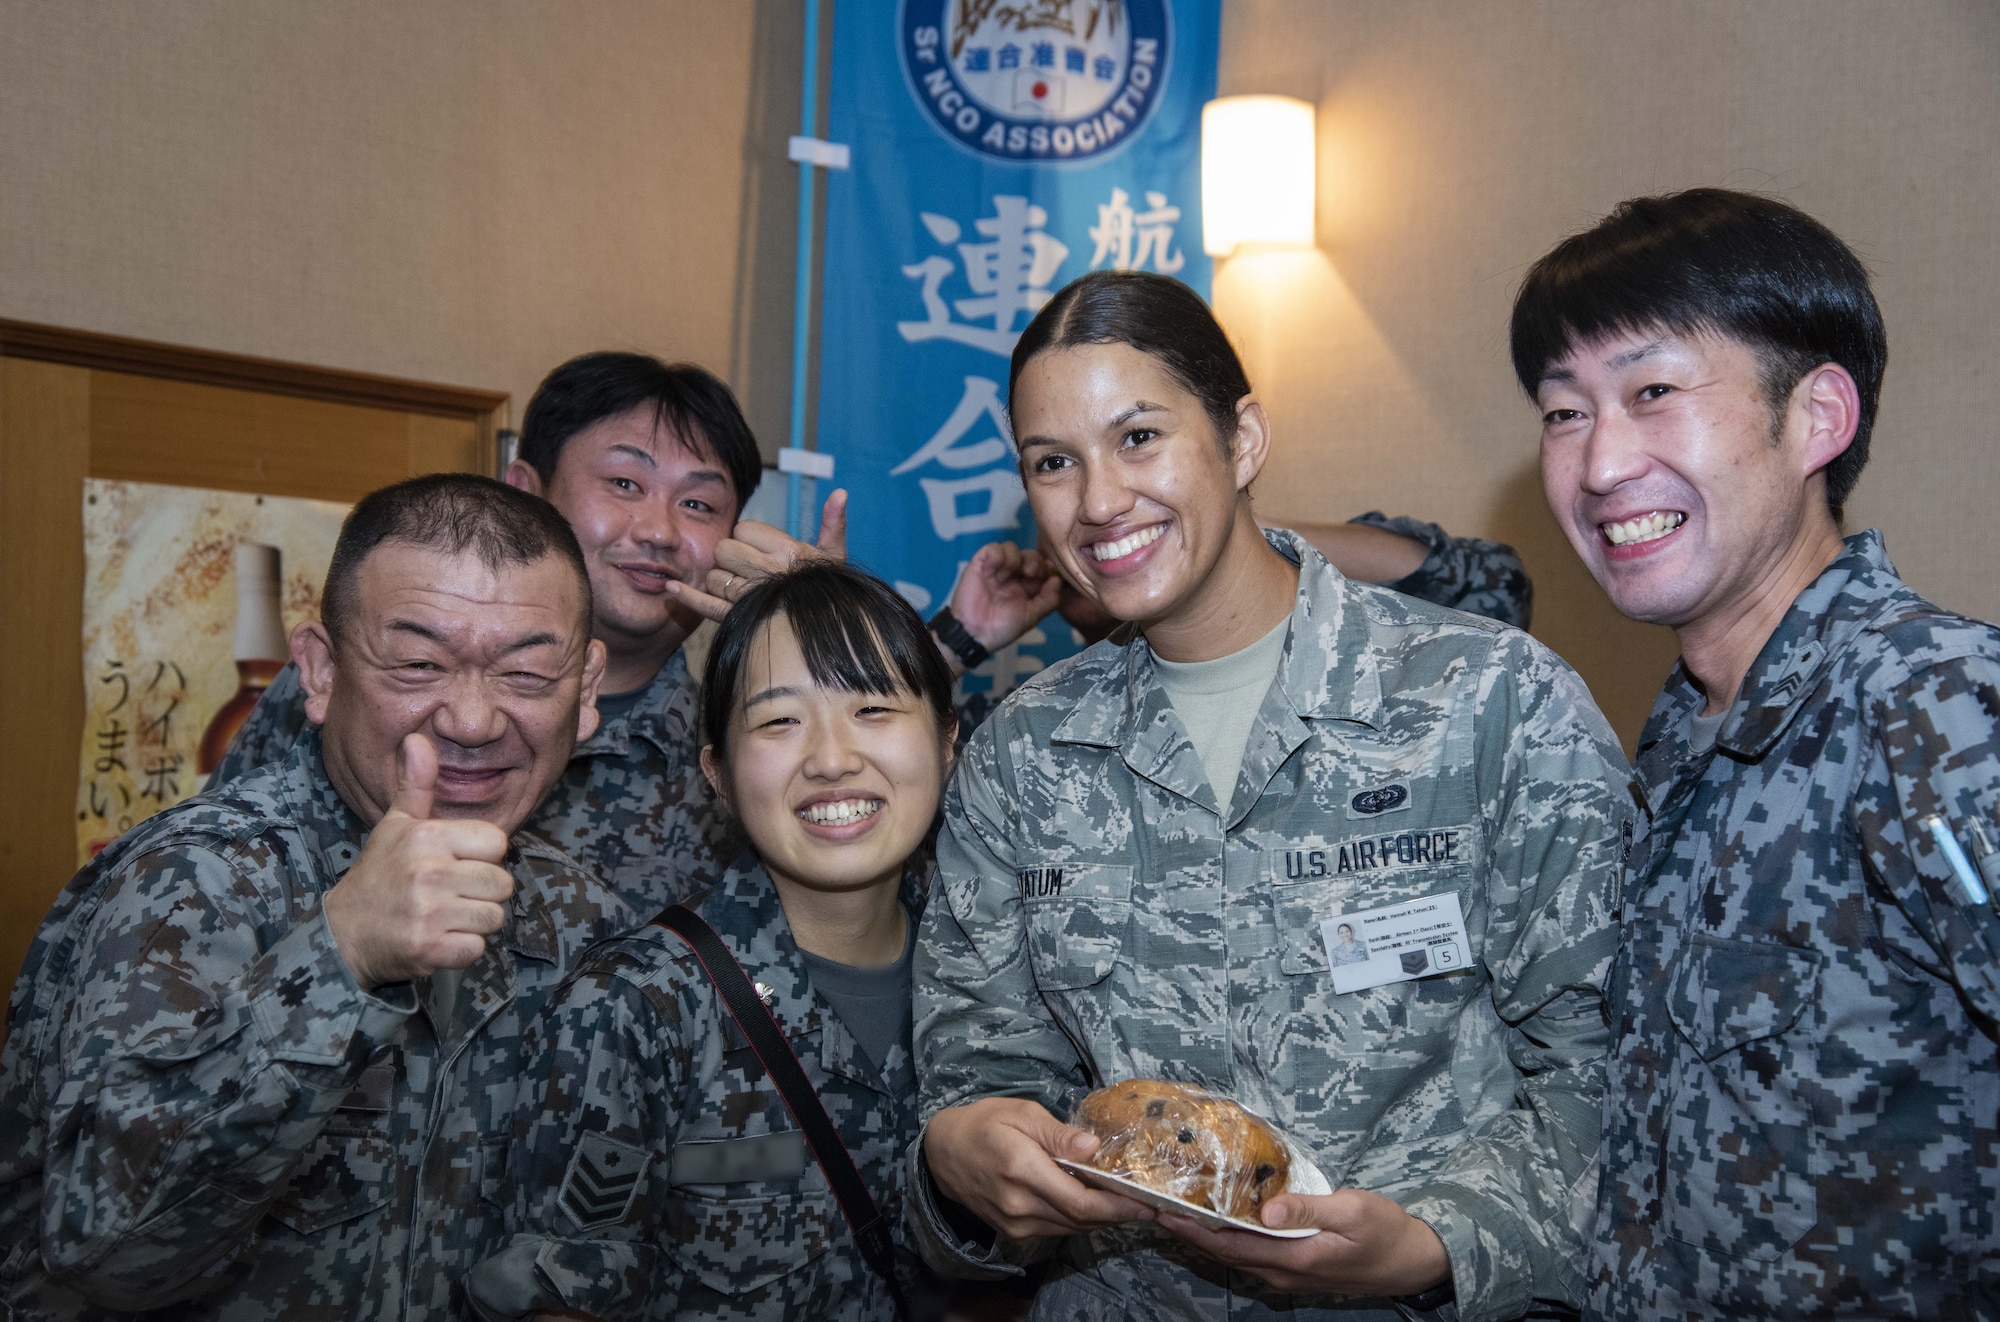 Japan Air Self-Defense Force members with the 37th Surveillance Squadron and a U.S. Air Force Airman 1st Class Hannah Tatum, a 35th Communications Squadron radio frequency transmissions systems technician, pause for a photo during a bilateral exchange program at Yamada Sub Base, Yamada Town, Japan, Oct. 17, 2018. During the exchange, personnel worked together and fellowshipped with one another to deepen bonds and better enhance mission execution through getting to know each other in and out of a work environment. (U.S. Air Force photo by Senior Airman Sadie Colbert)